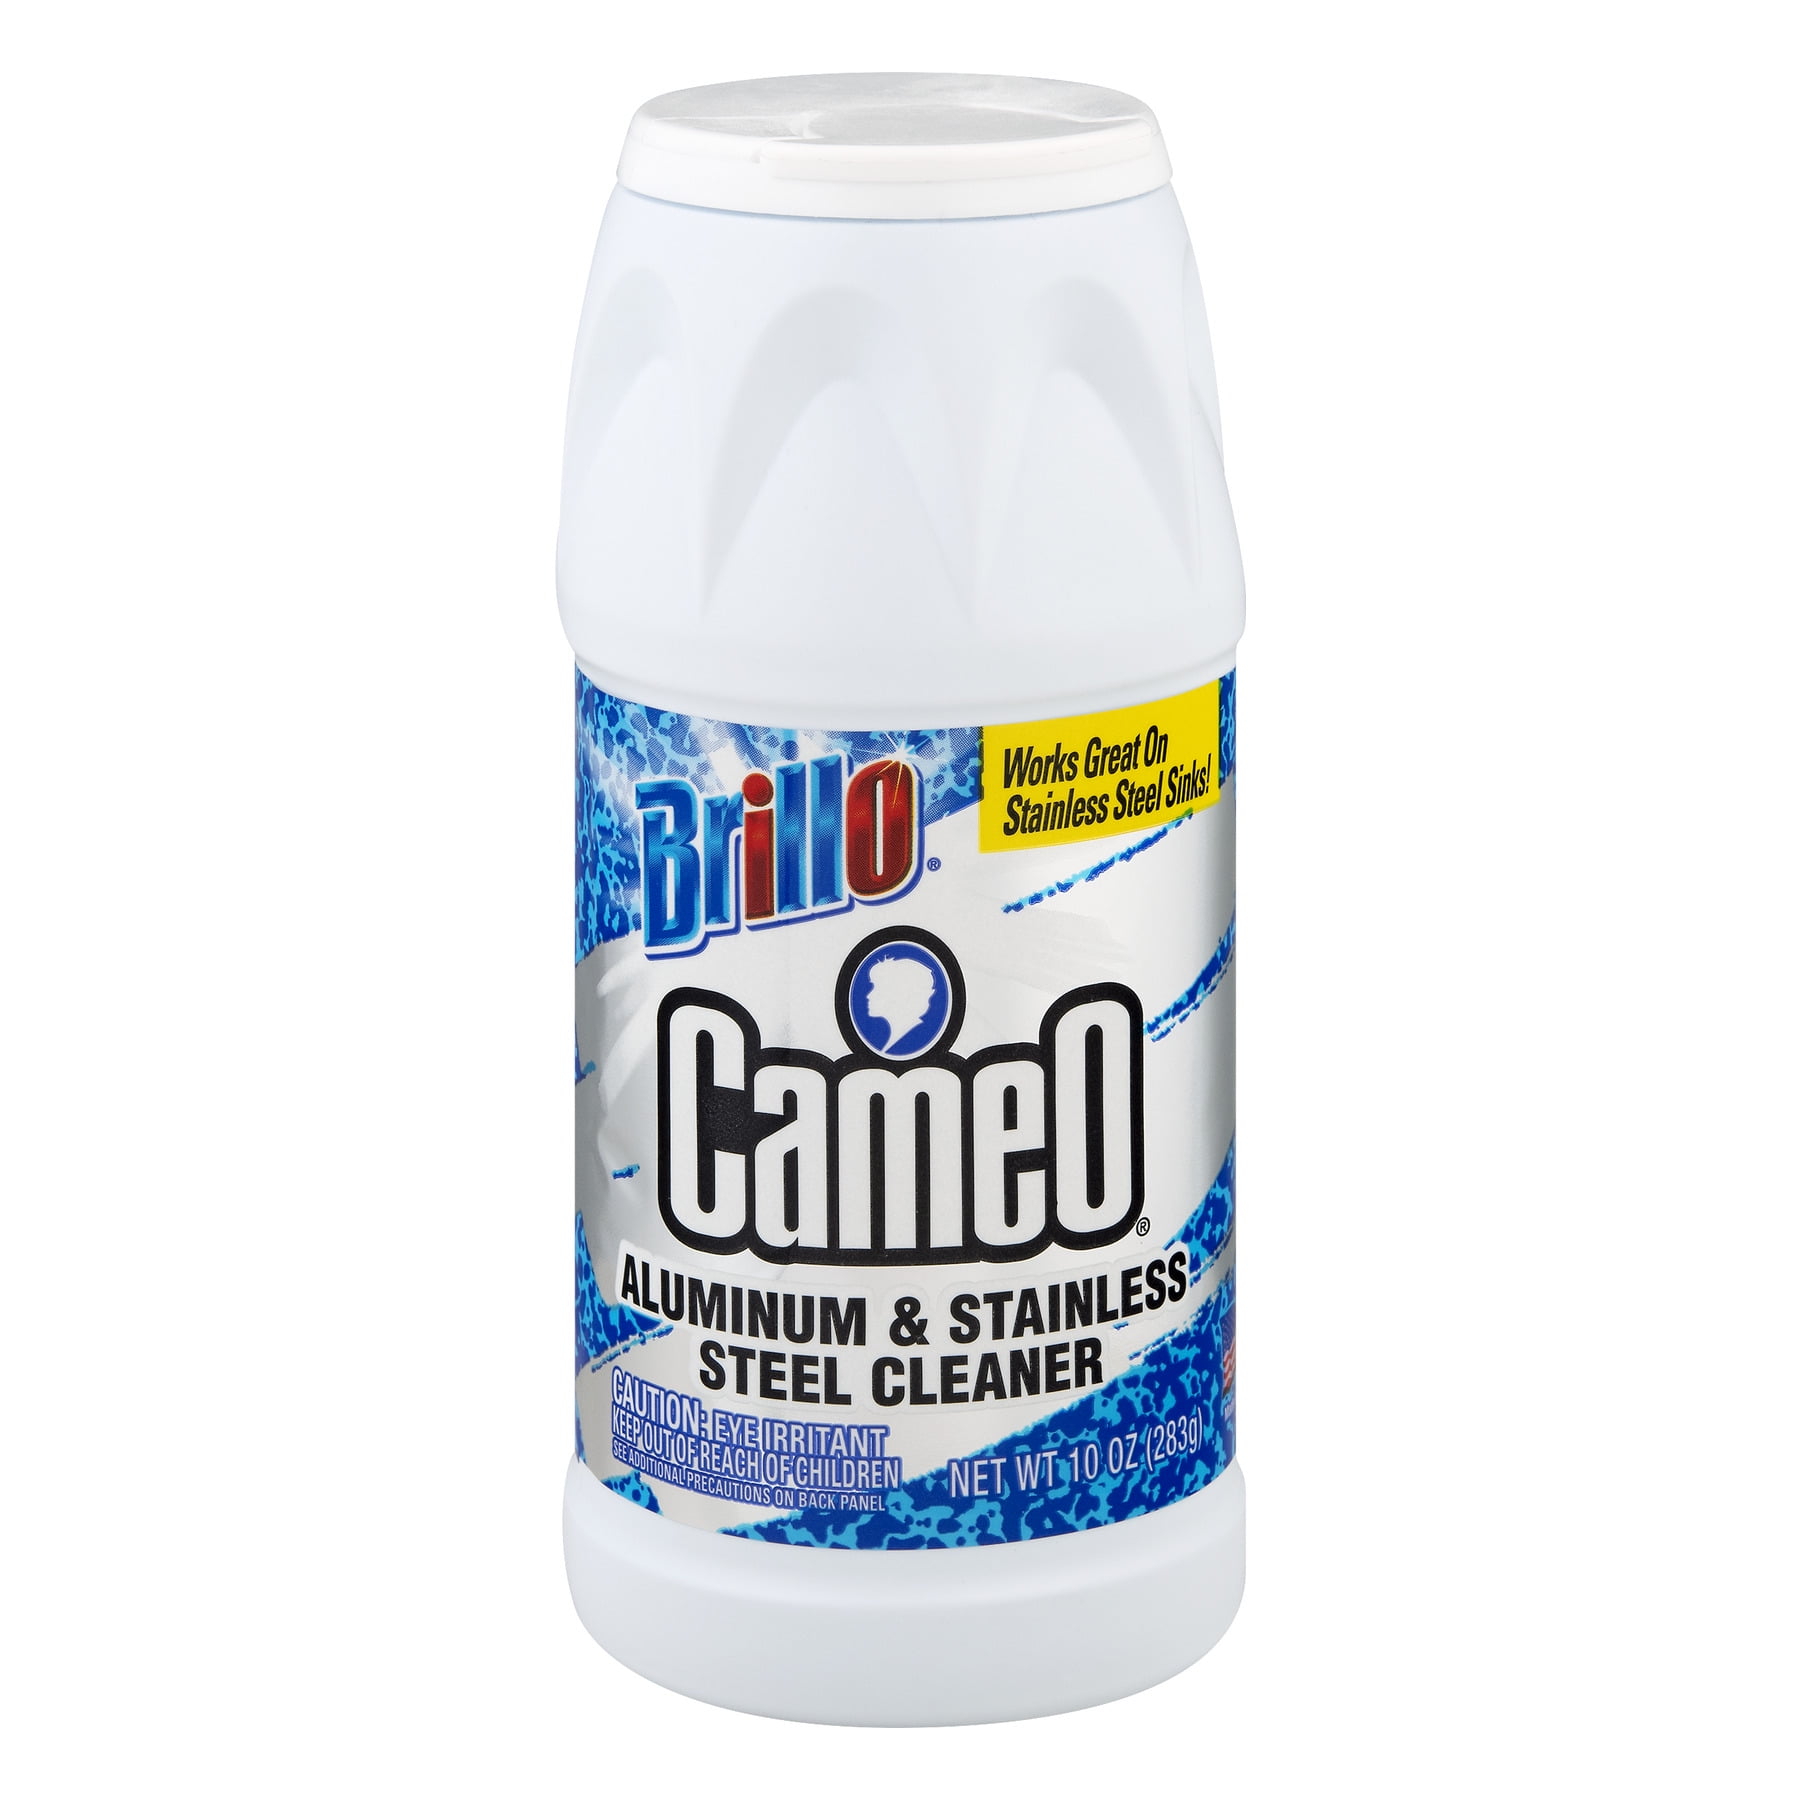 Brillo Cameo Aluminum & Stainless Steel Cleaner